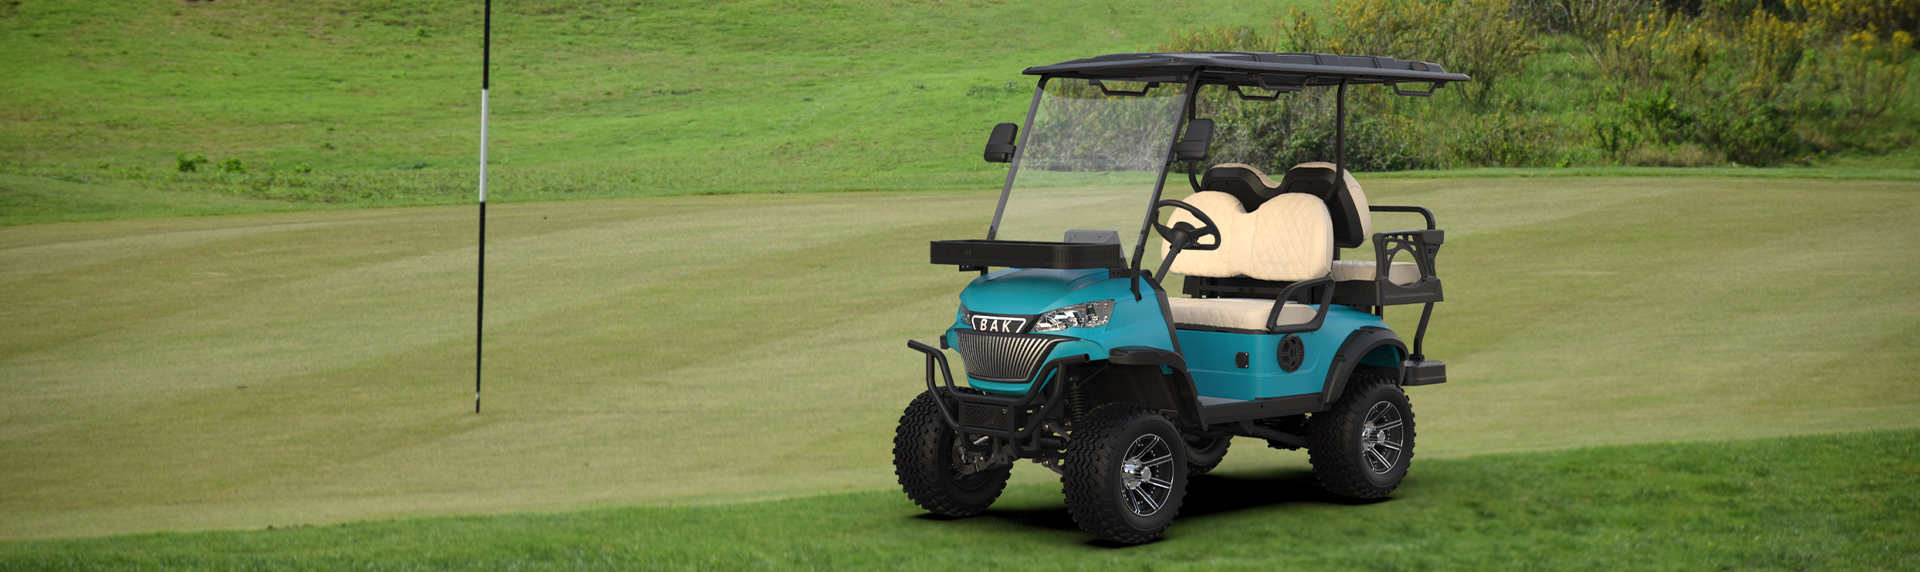 Special use for scenic spots K-C4+2 Golf Cart With 48V/72 Lithium Battery